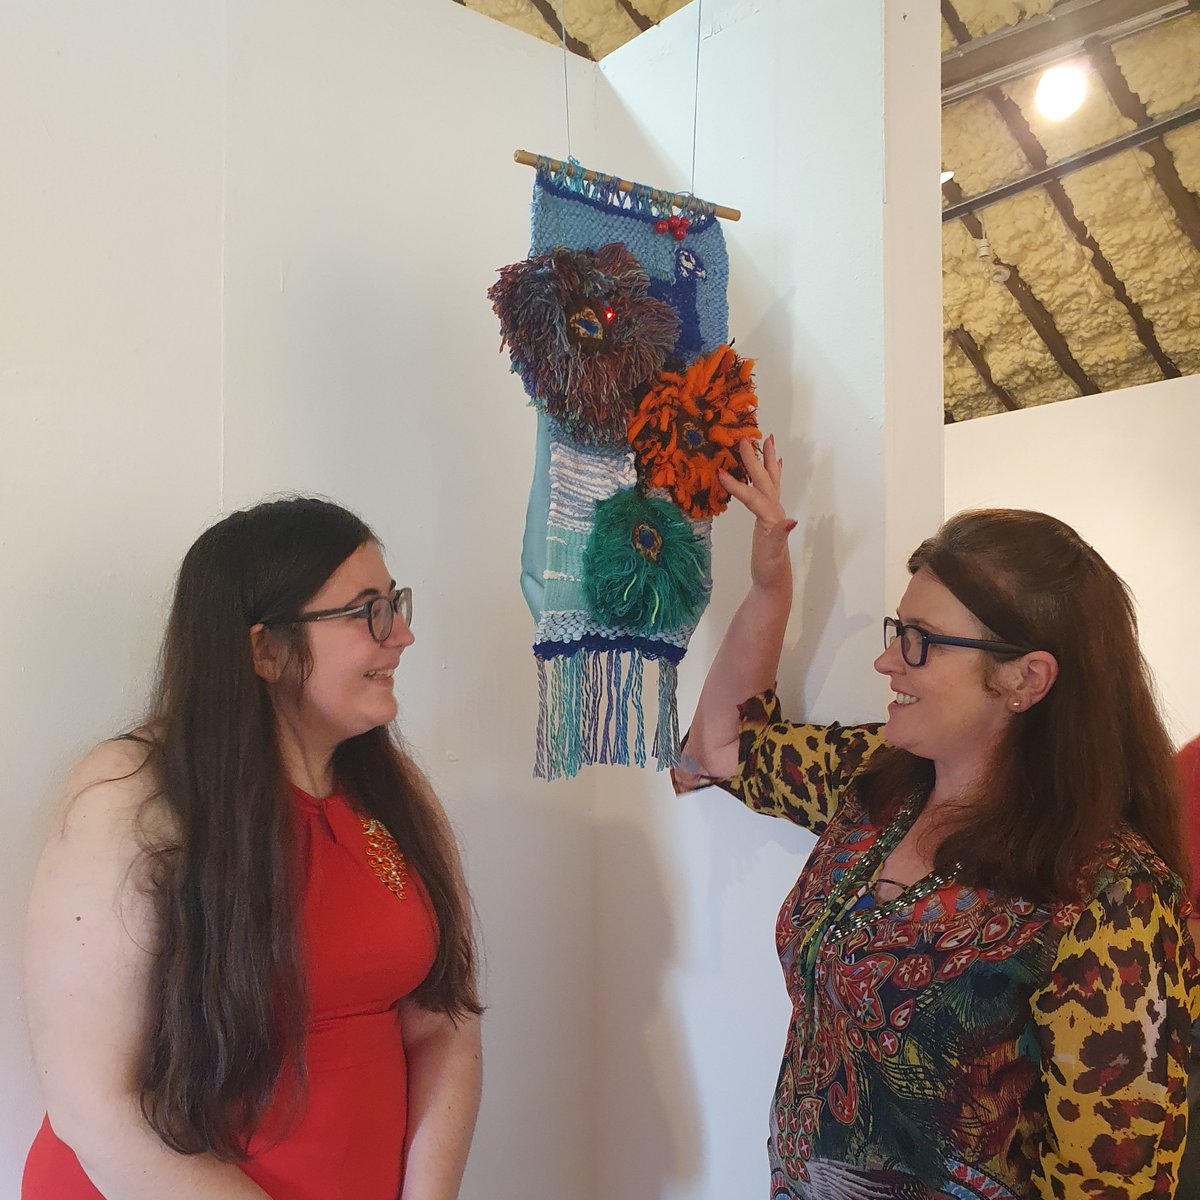 Lorna Drennan joined our 'Re-Fashioning the Future' #eTextiles workshop series last year and is now showcasing her newly acquired eTextiles skills with 'Peacock', an eTextile woven wall hanging at the Grennan Mill Craft School graduate show. #innovation #textileinnovation